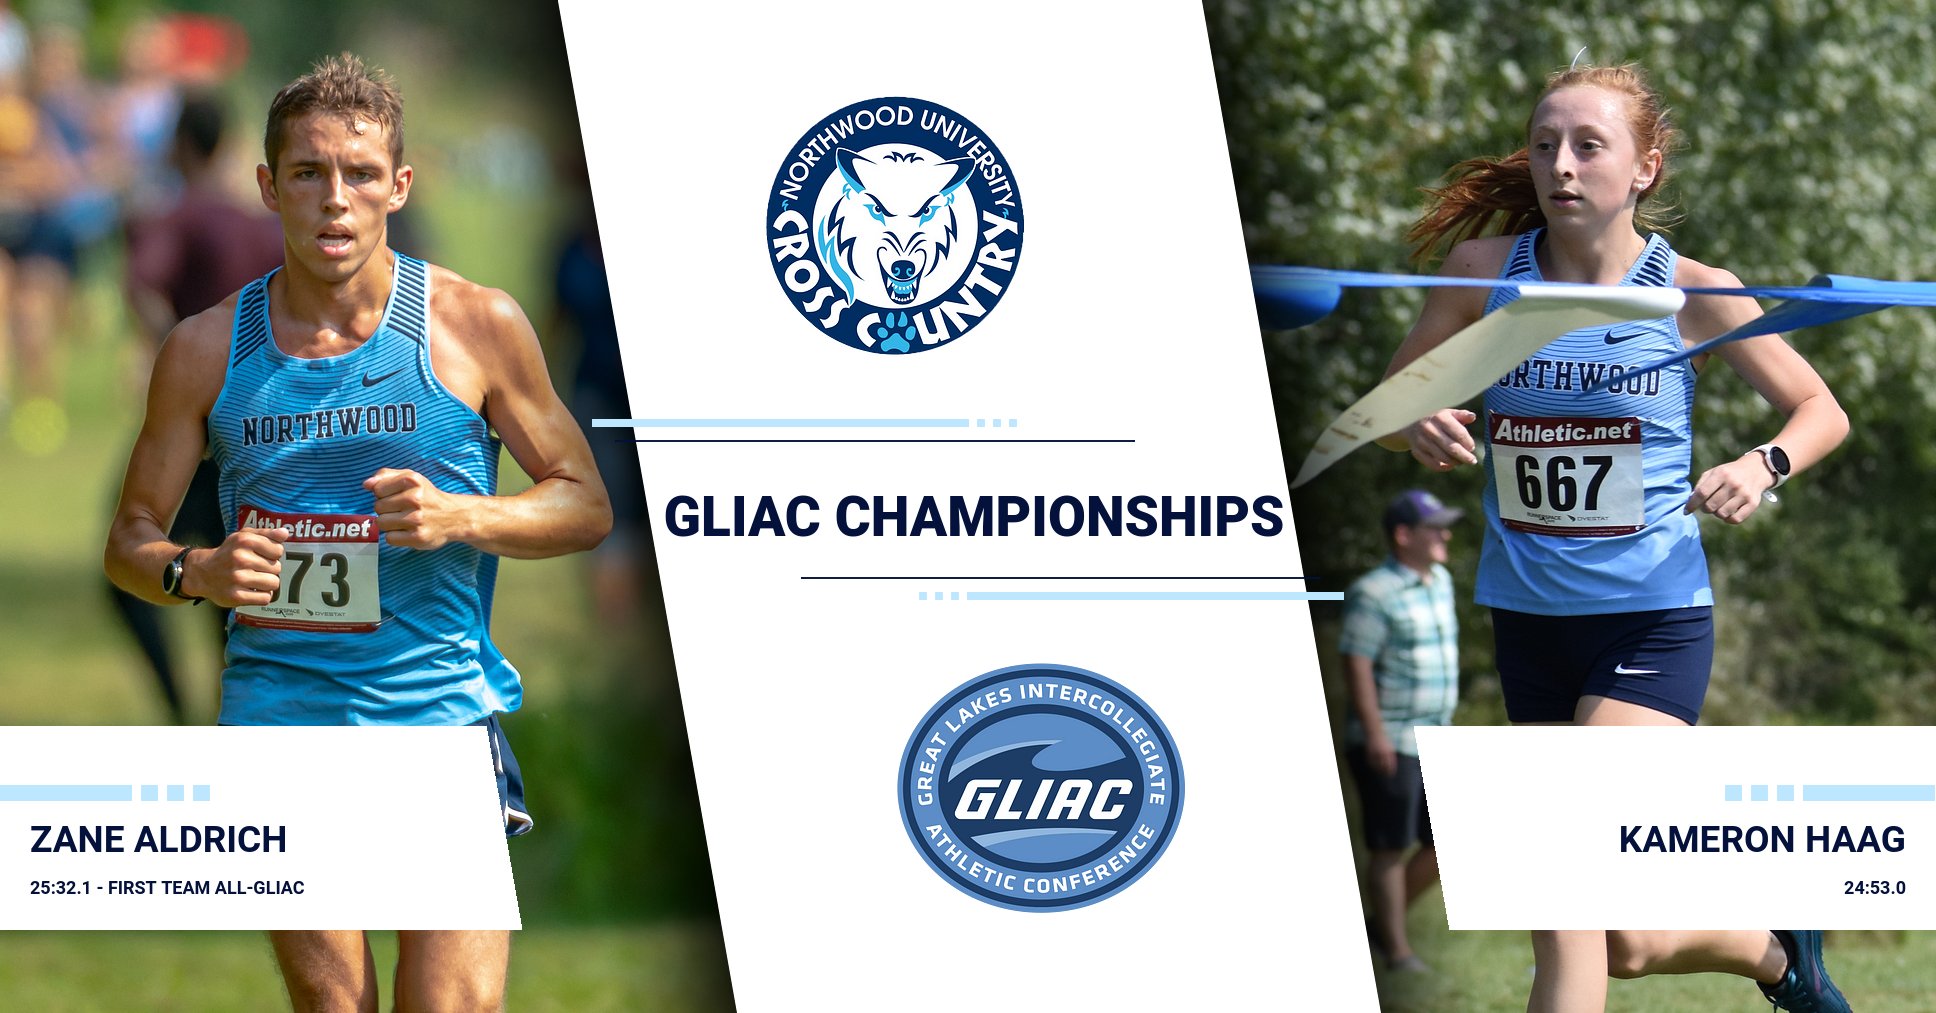 Zane Aldrich Earns First Team All-GLIAC Honors As Cross Country Competes At GLIAC Championships